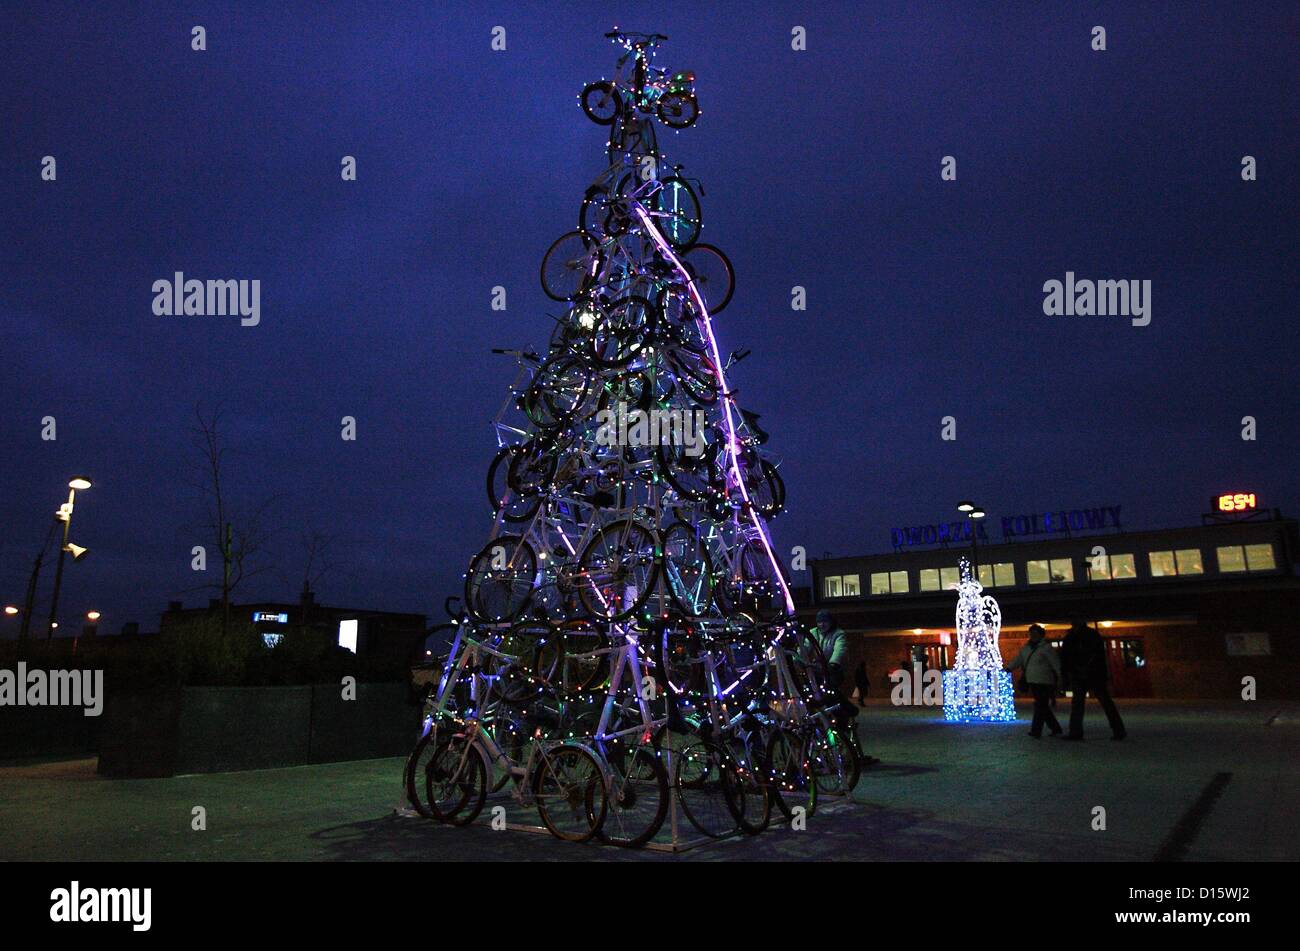 Tczew, Poland 8th, December 2012  Christmas tree made of bicycles on square in front of Tczew railway station entrance. Every passerby can get on the bike and pedaling light Christmas lights on the Christmas tree. Stock Photo